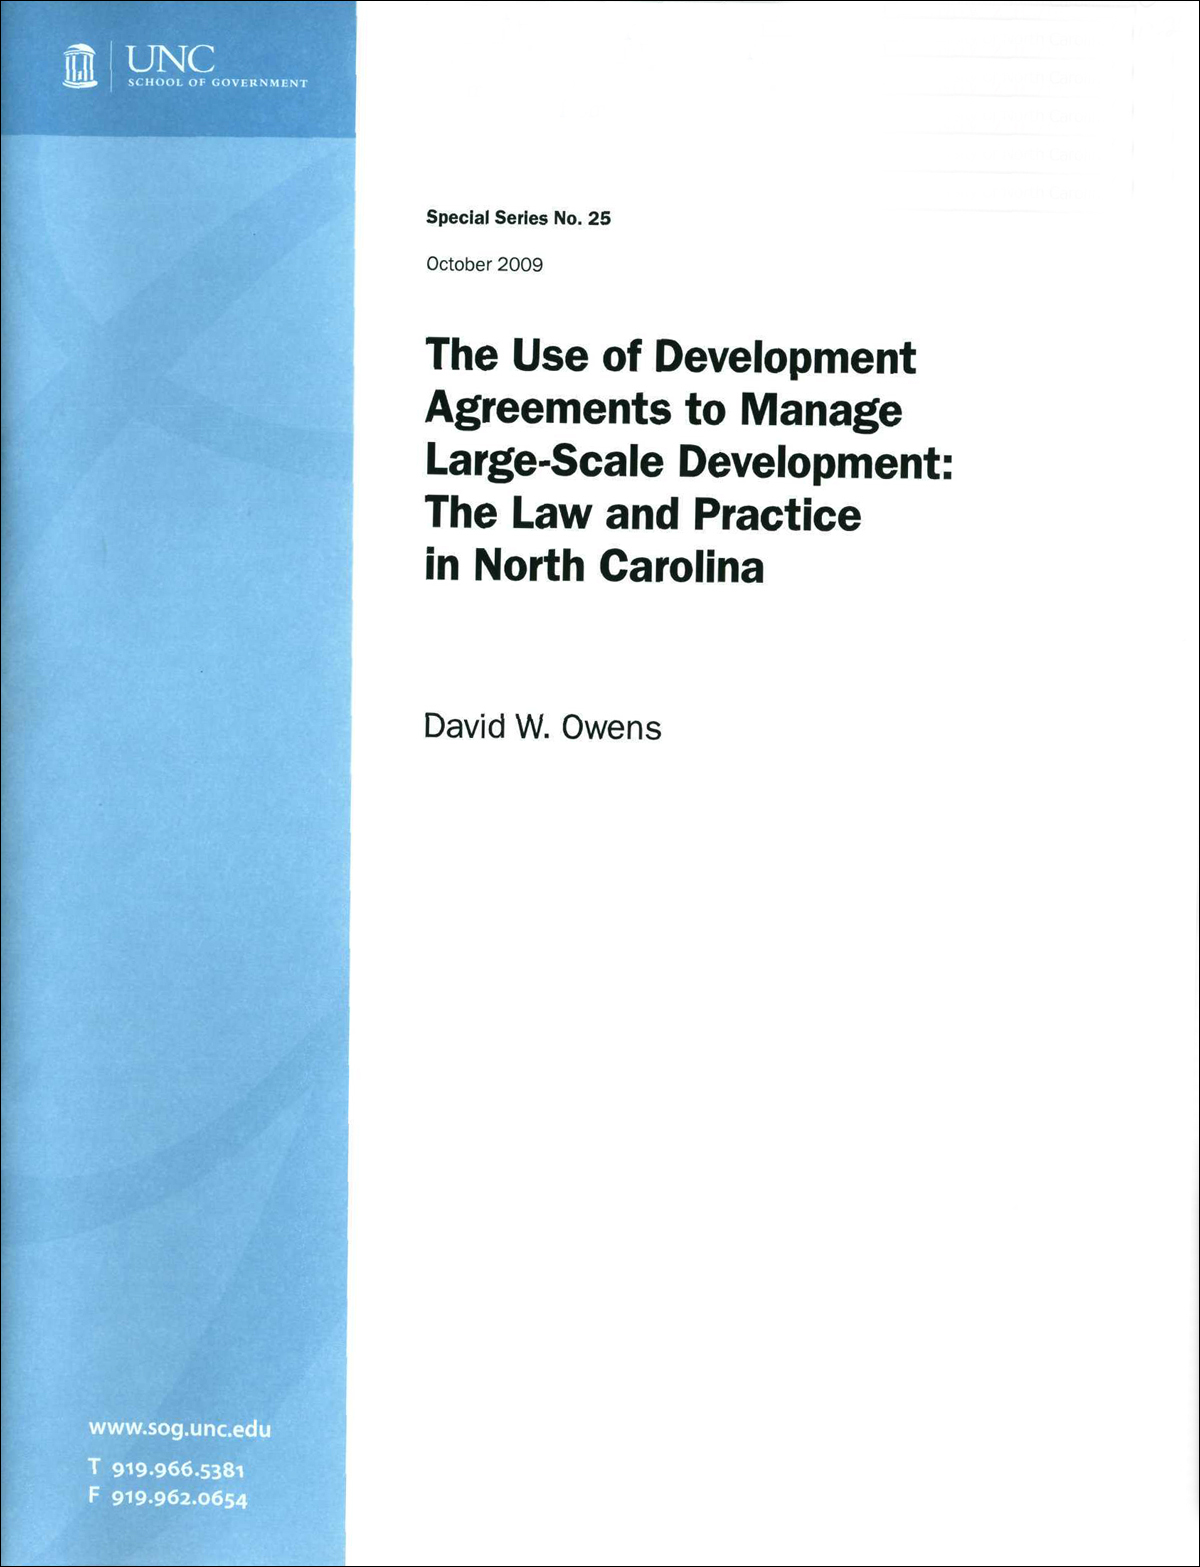 The Use of Development Agreements to Manage Large-Scale Development: The Law and Practice in North Carolina, by David W. Owens, Special Series No. 25, October 2009